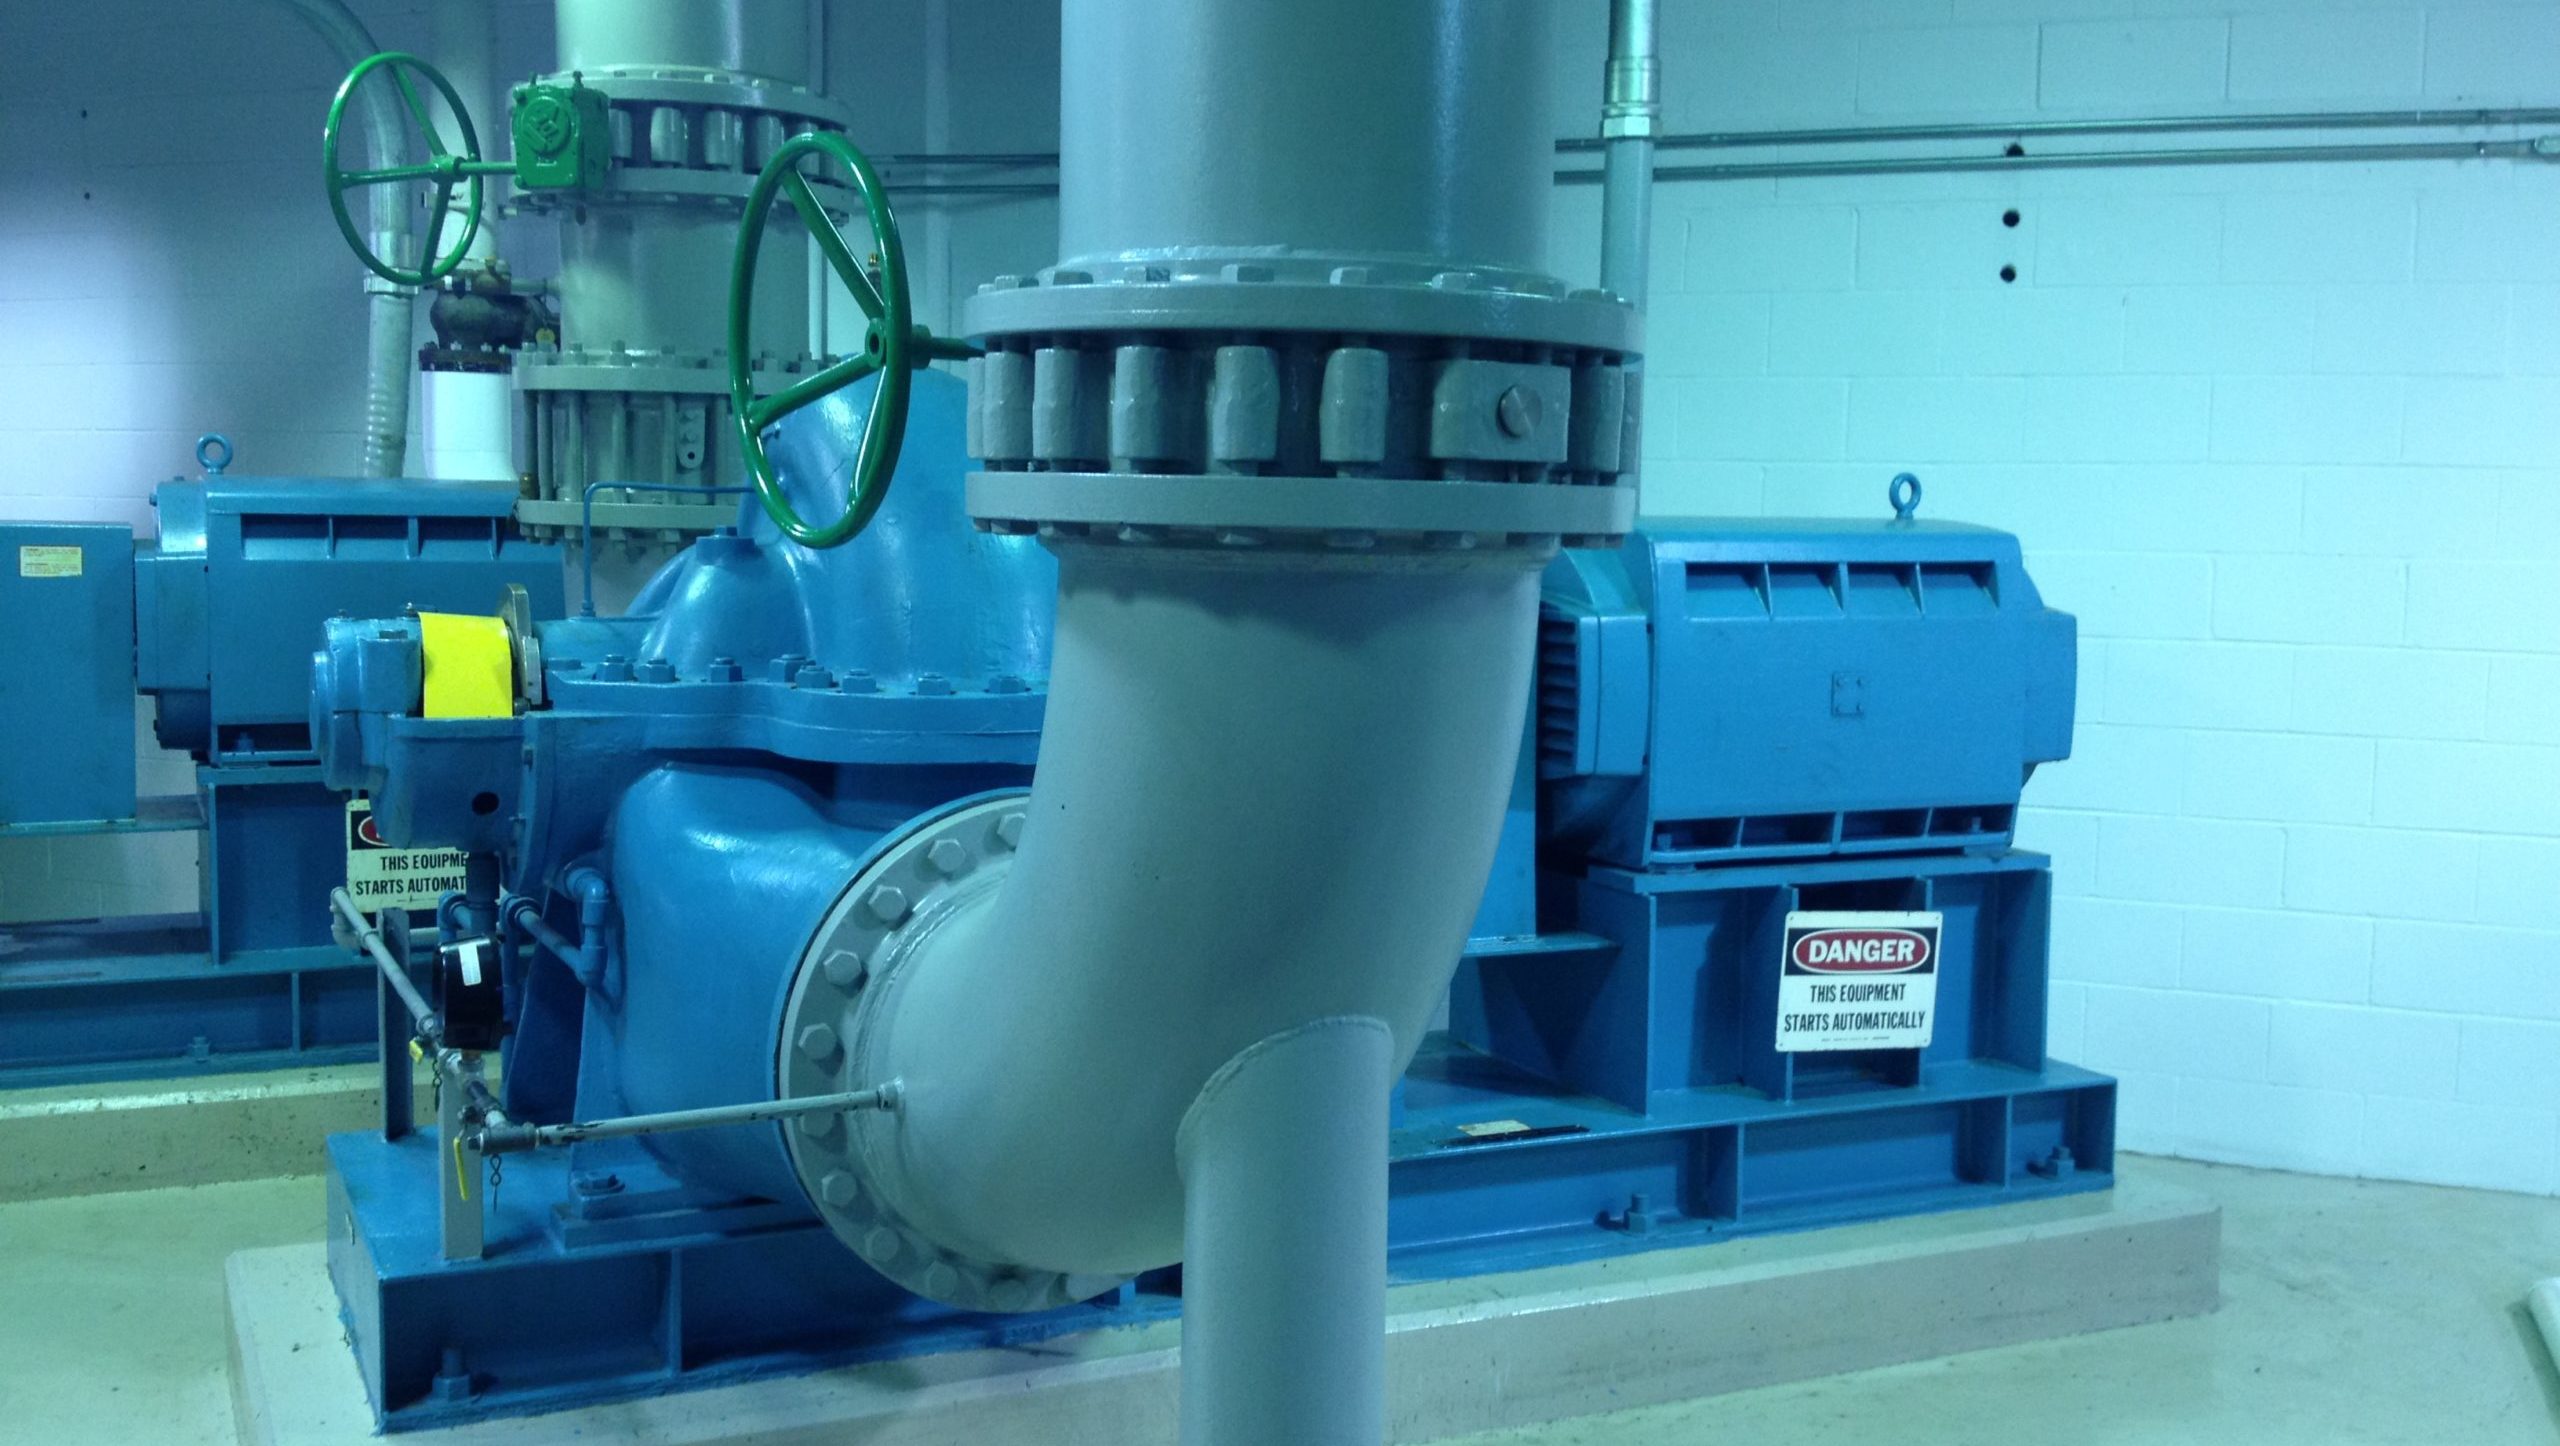 Condensed water pumps at CoolCo